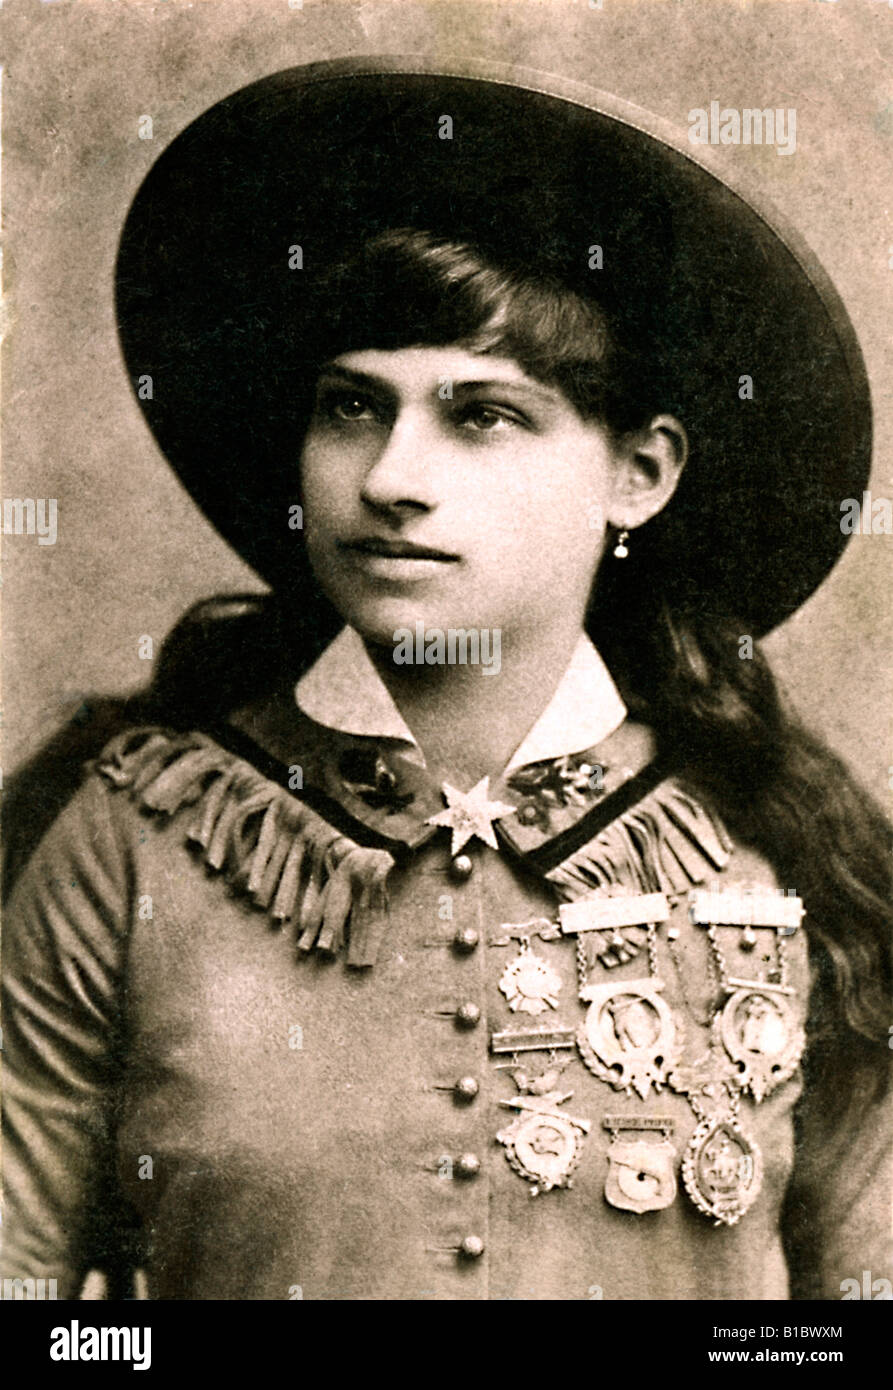 Annie Oakley 1890 photo of the legendary American sharpshooter and performer with Buffalo Bills Wild West Show Stock Photo